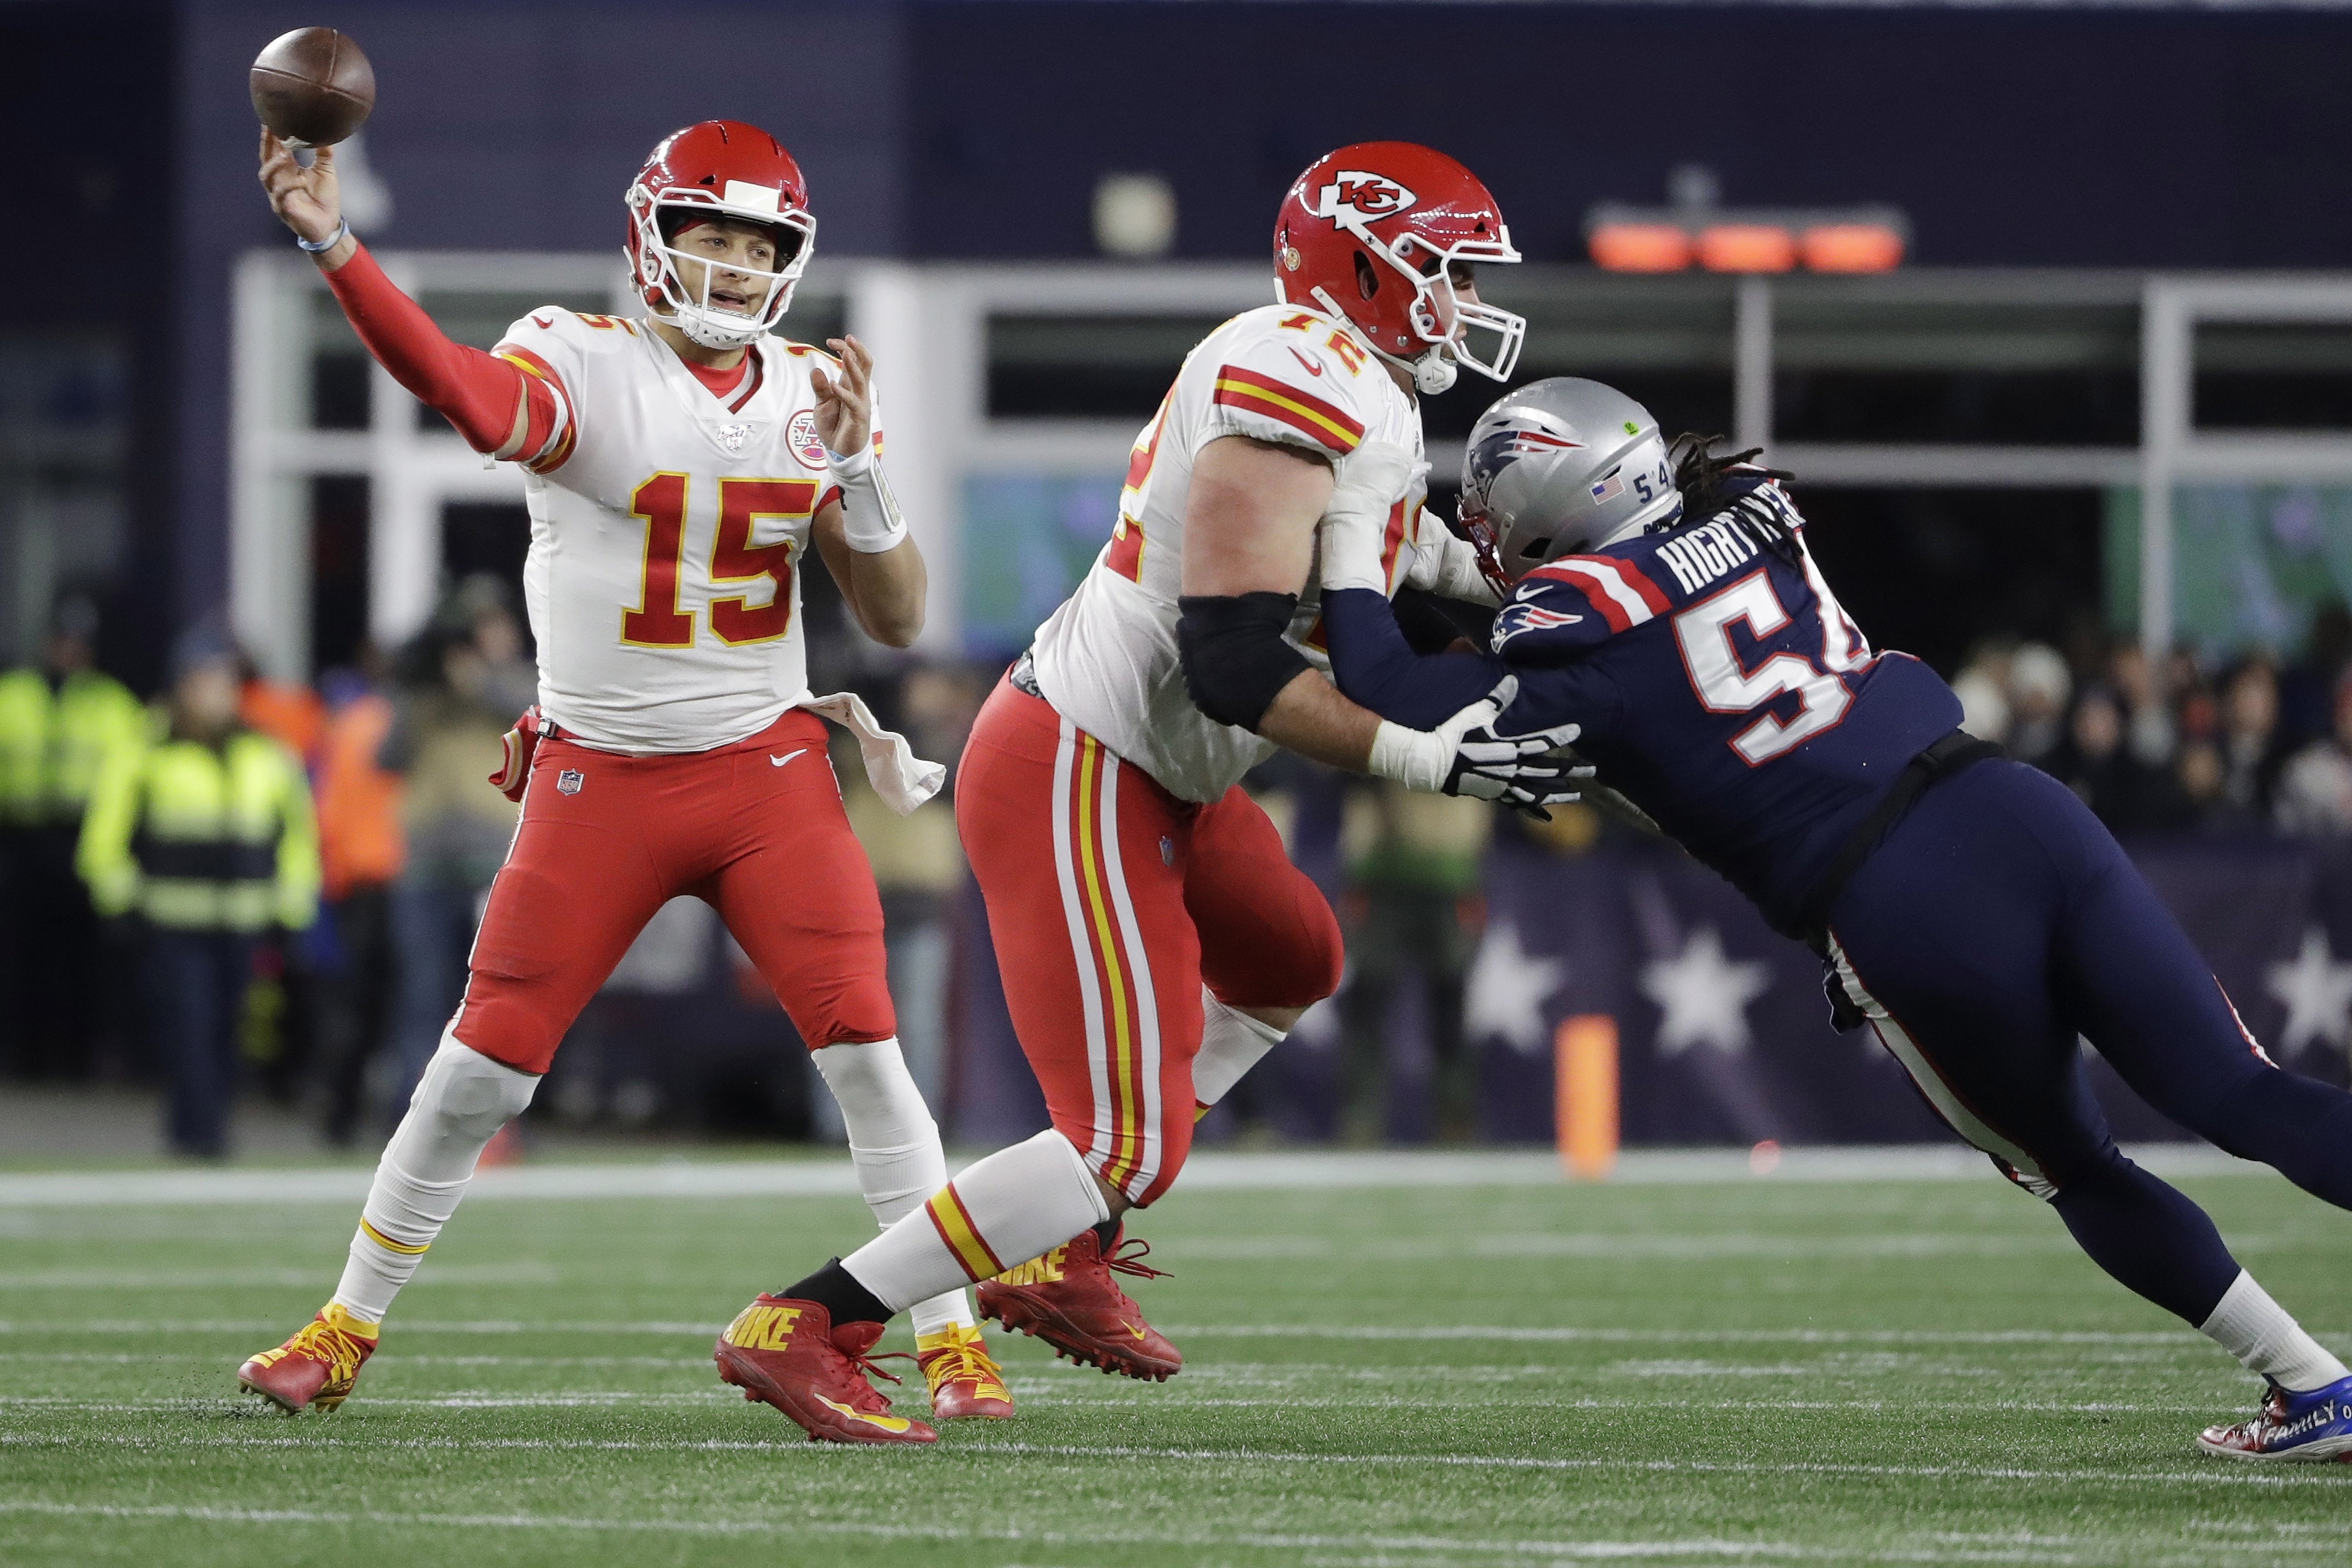 KC survives errors, takes AFC West with 23-16 win over Pats